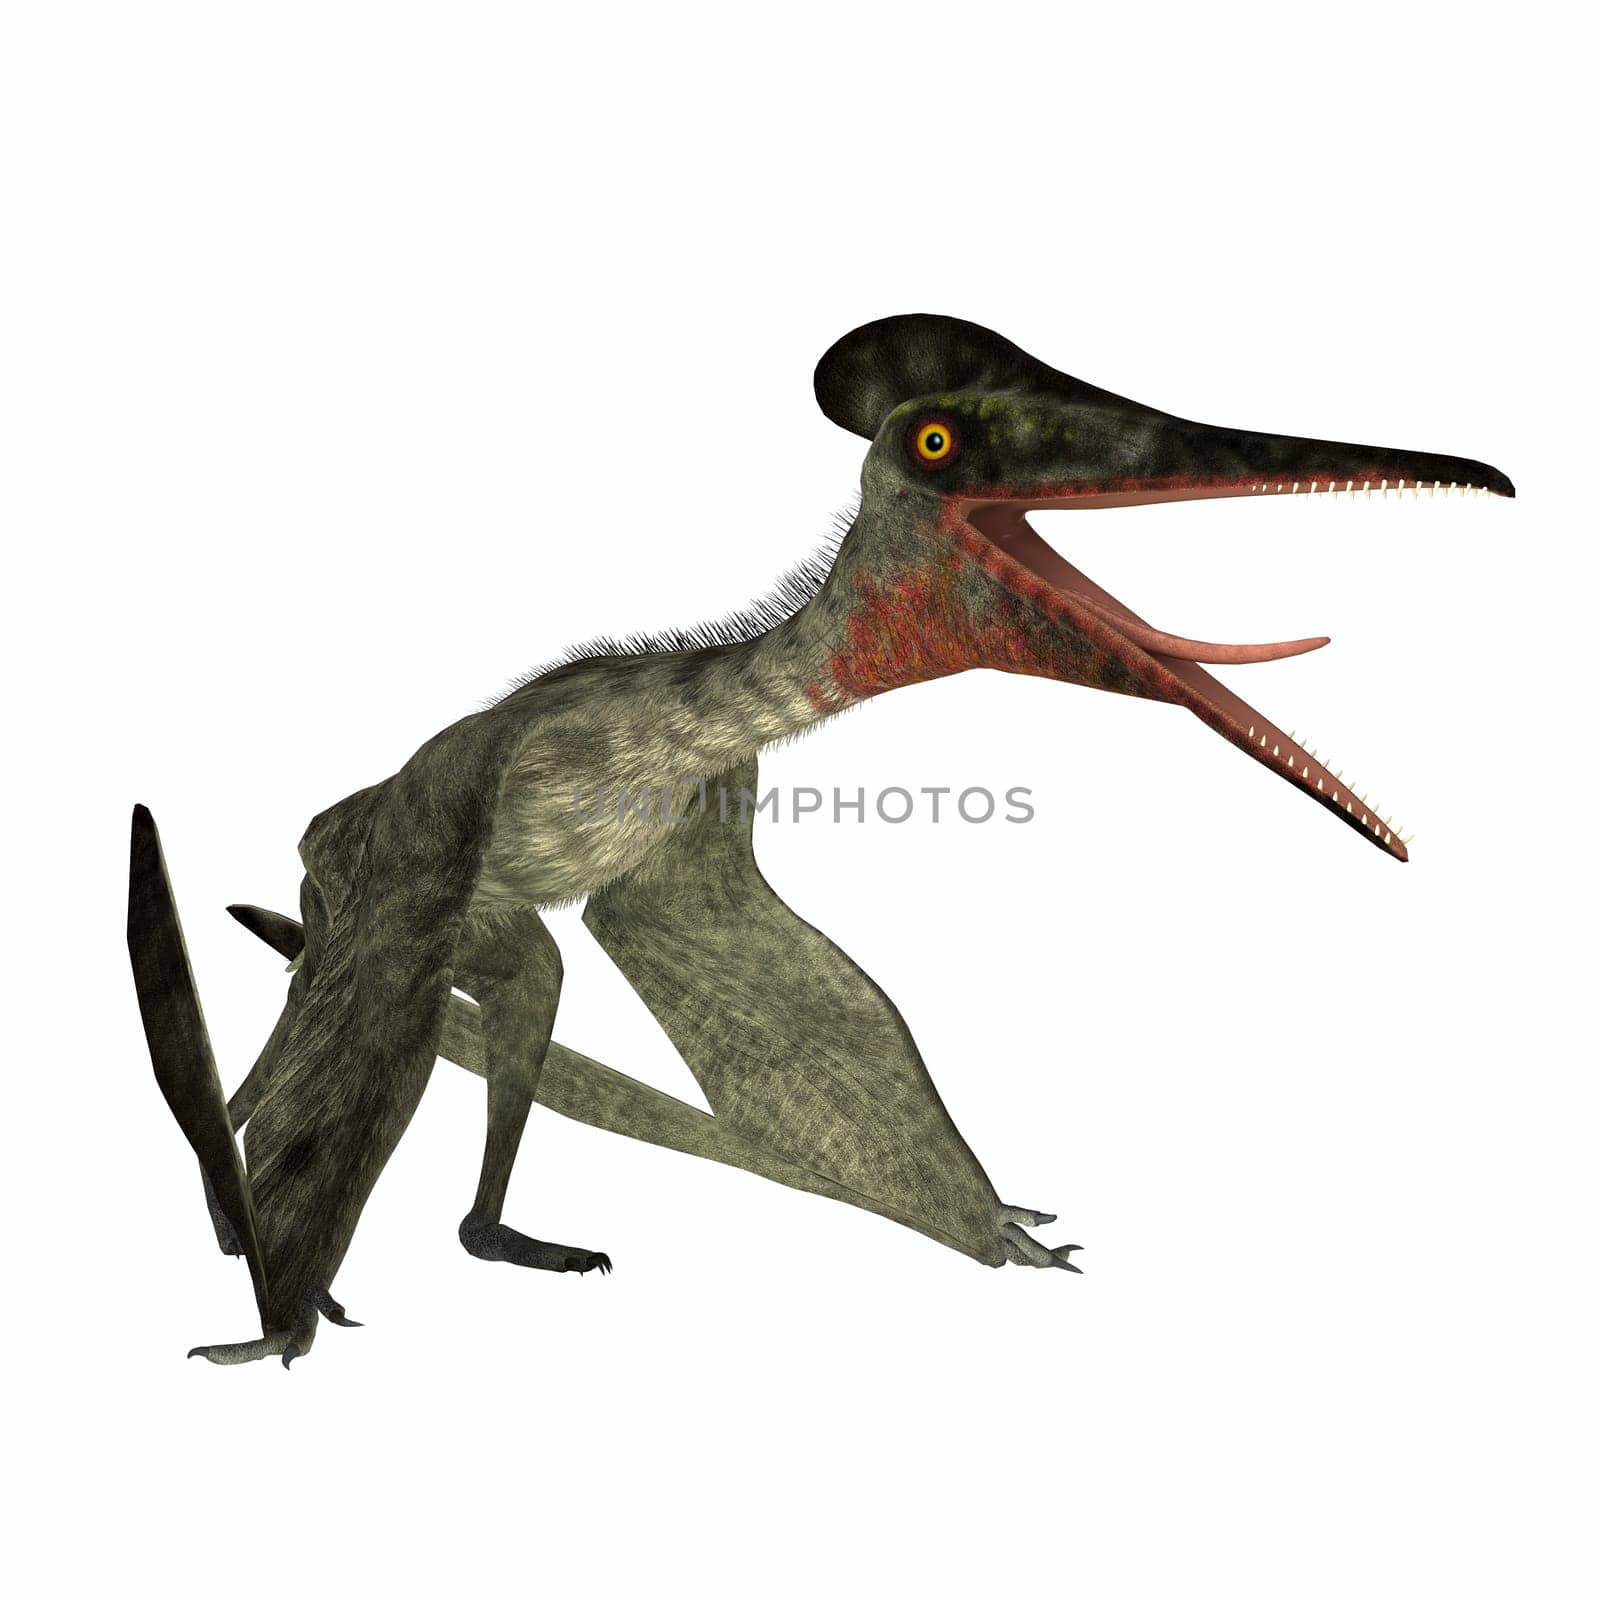 Pterodactylus was a flying carnivorous reptile that lived in the Jurassic Period of Bavaria, Germany.